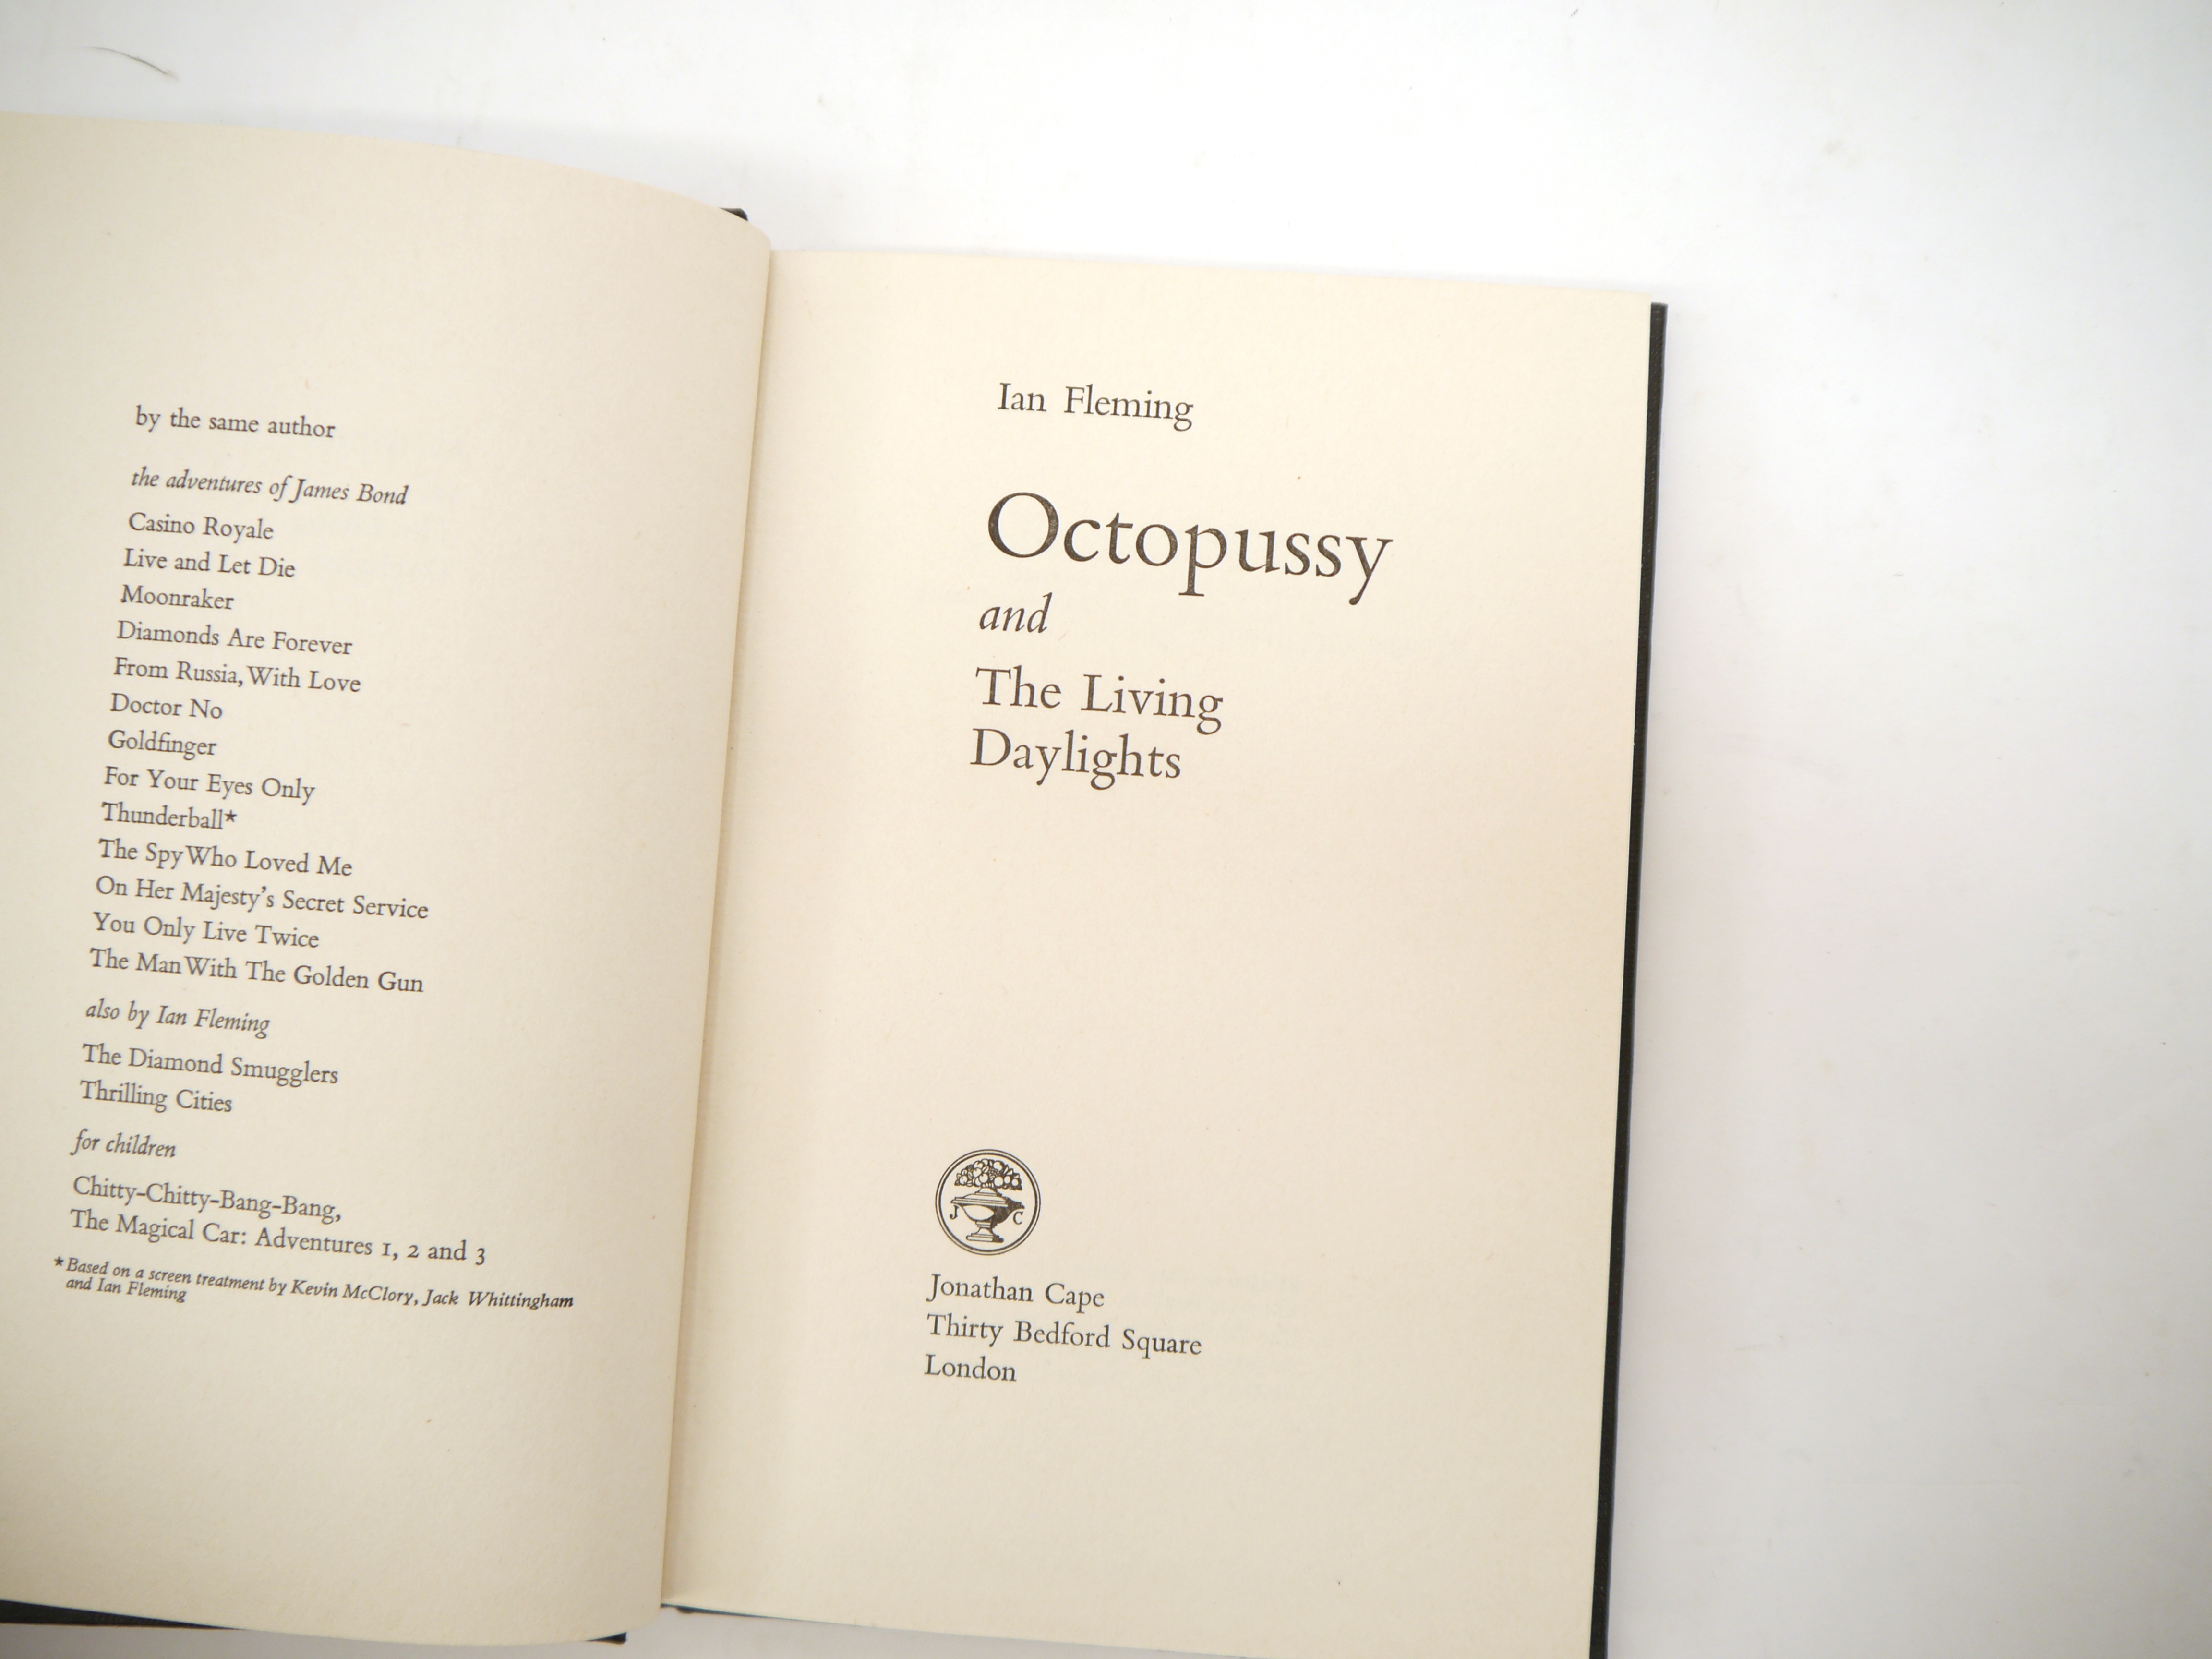 Ian Fleming: 'Octopussy and the Living Daylights', London, Jonathan Cape, 1966, 1st edition, - Image 3 of 4